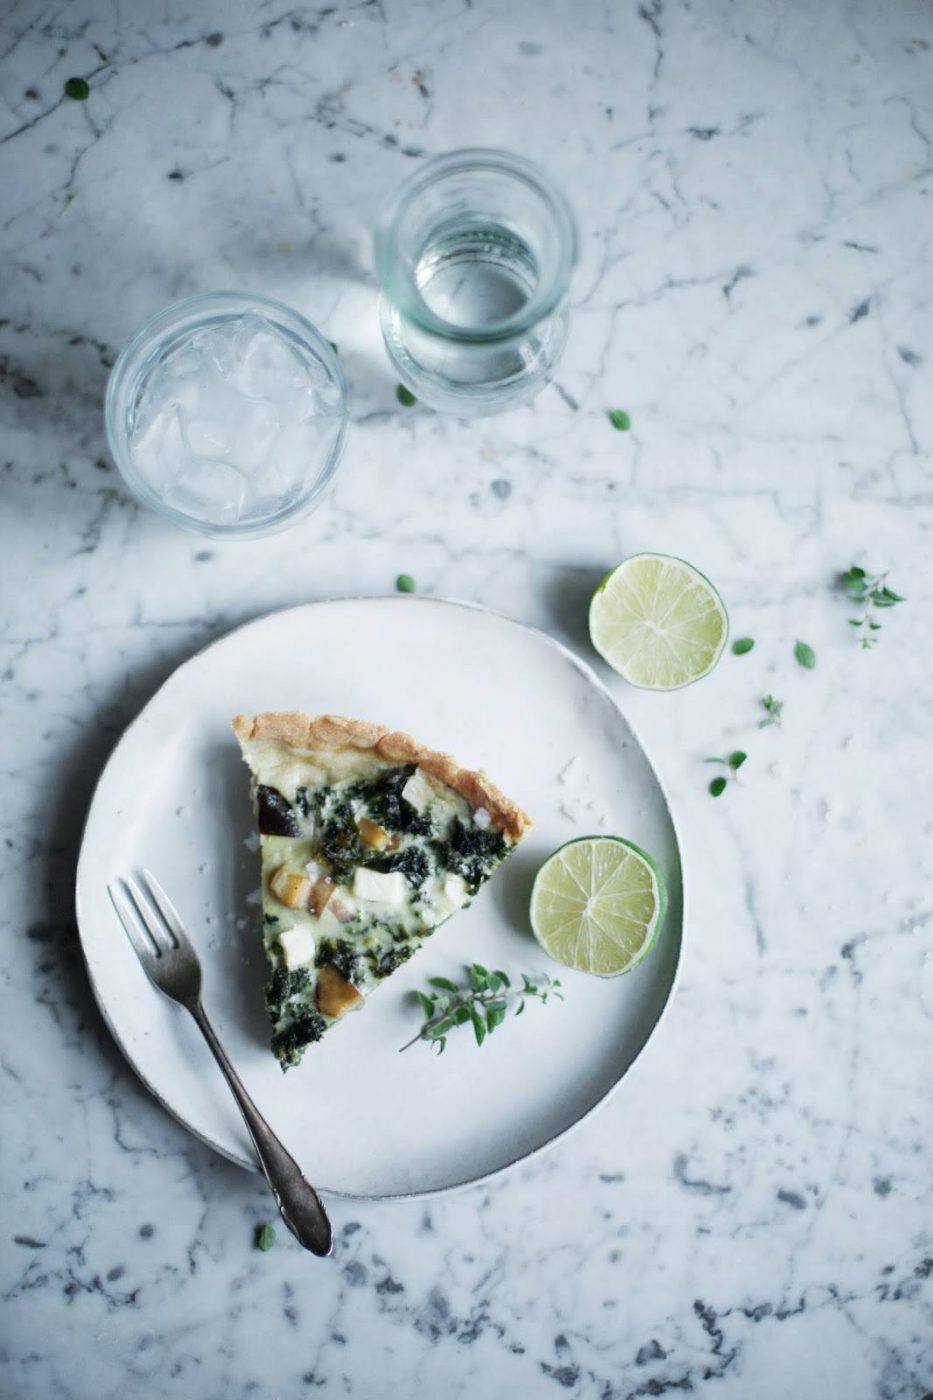 Image for Gluten-free Kale Quiche with Mushrooms & Coconut Milk